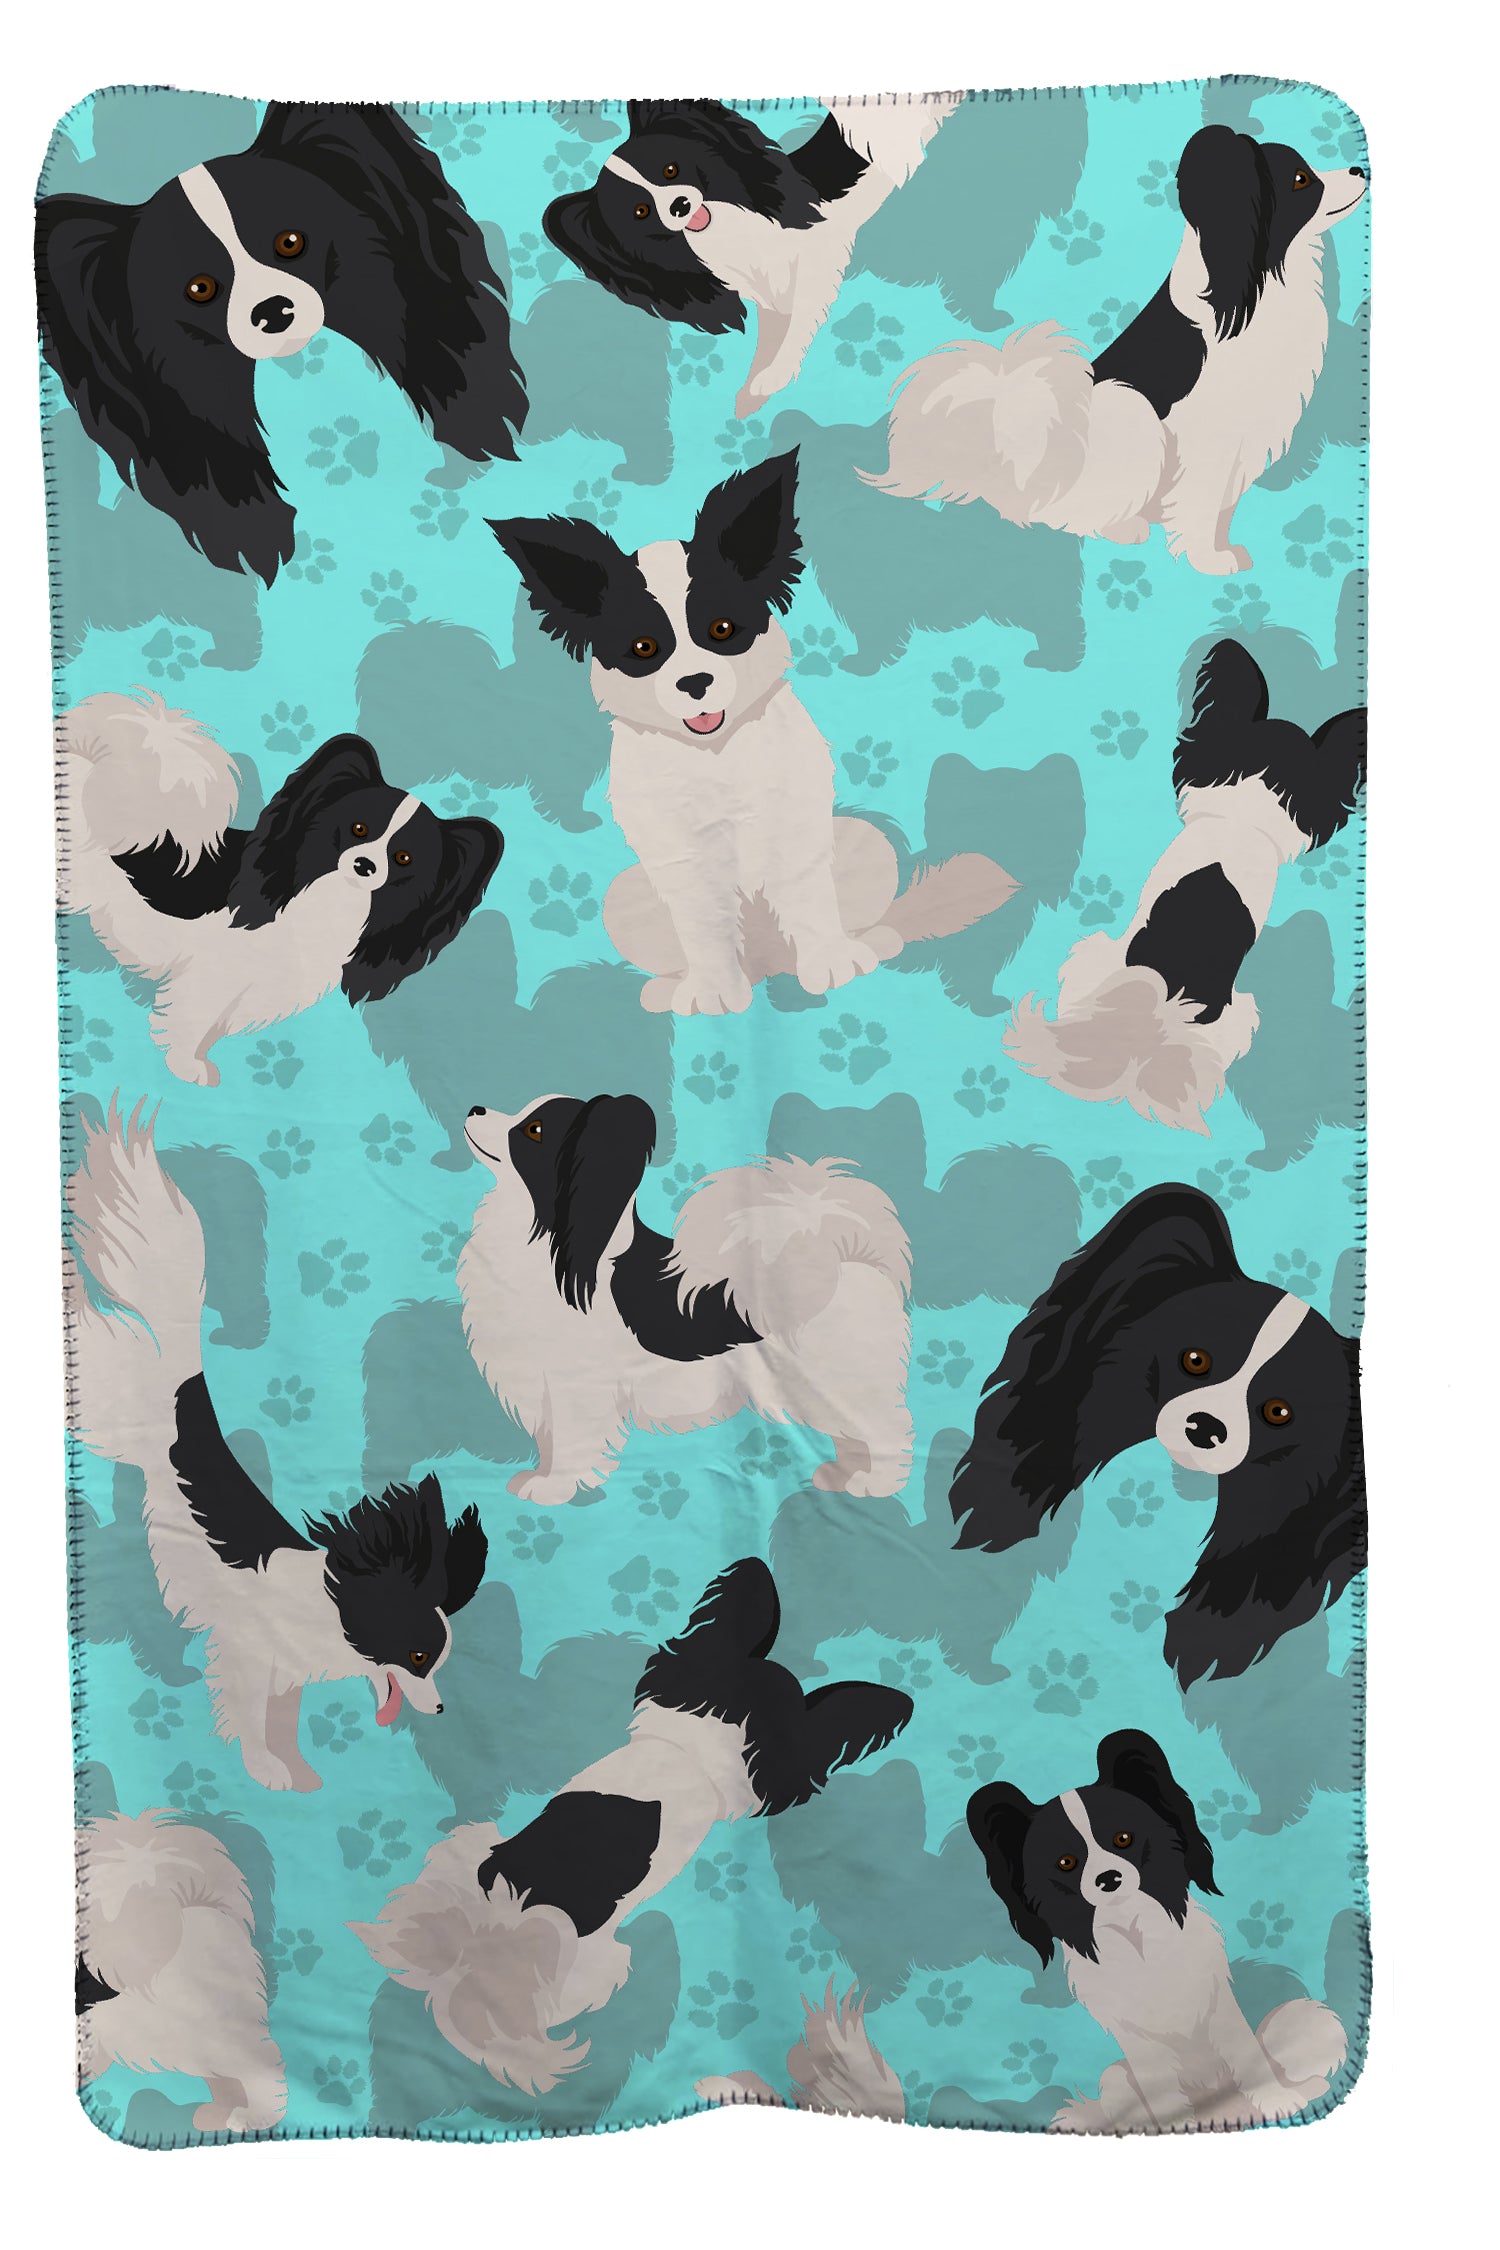 Buy this Black and Whtie Papillon Soft Travel Blanket with Bag